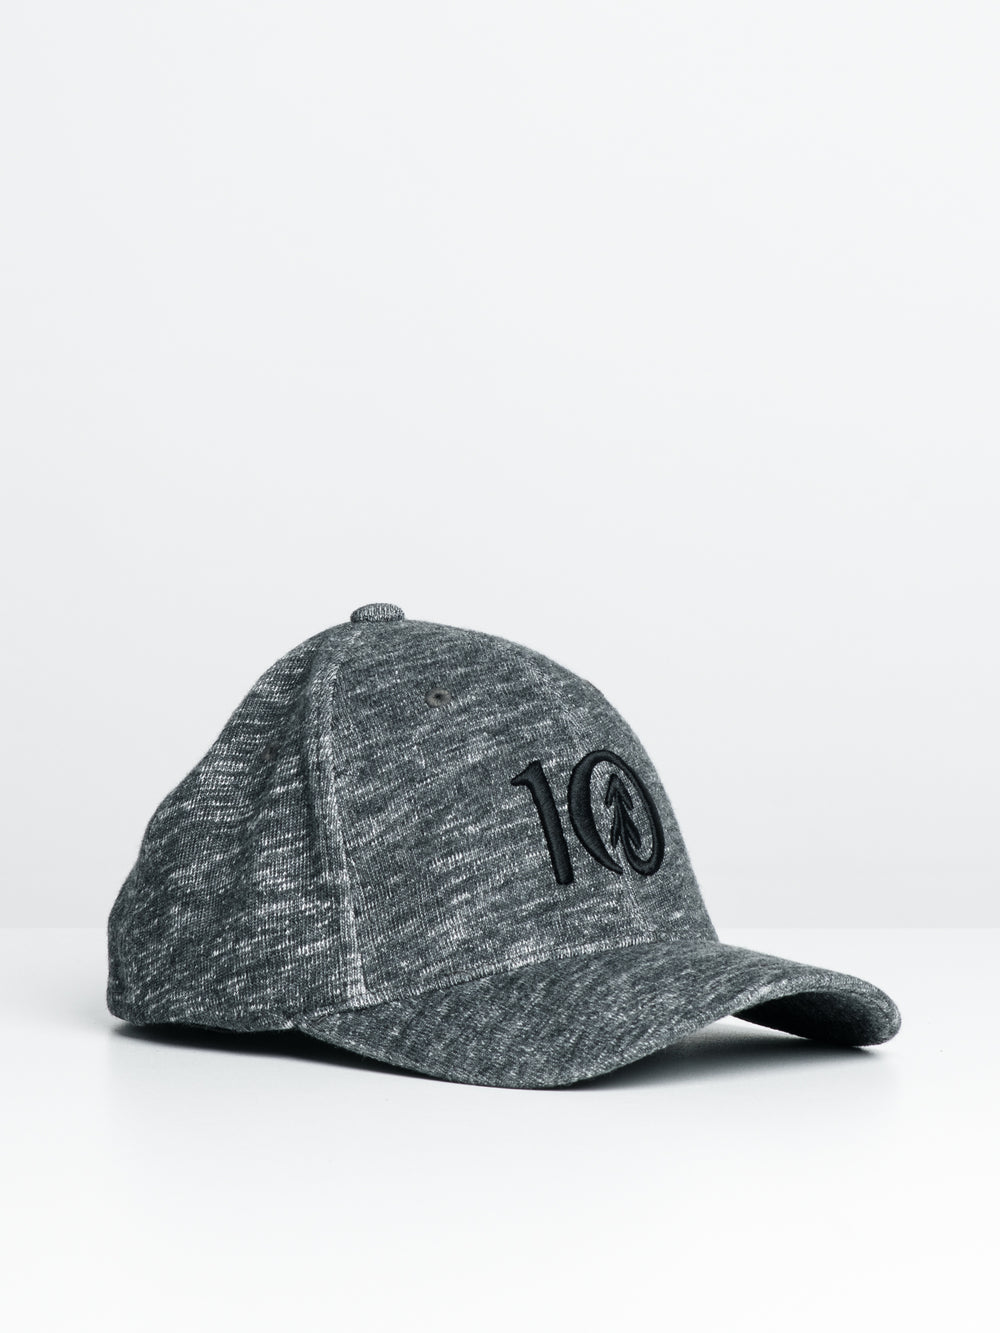 TENTREE THICKET LOGO HAT  - CLEARANCE